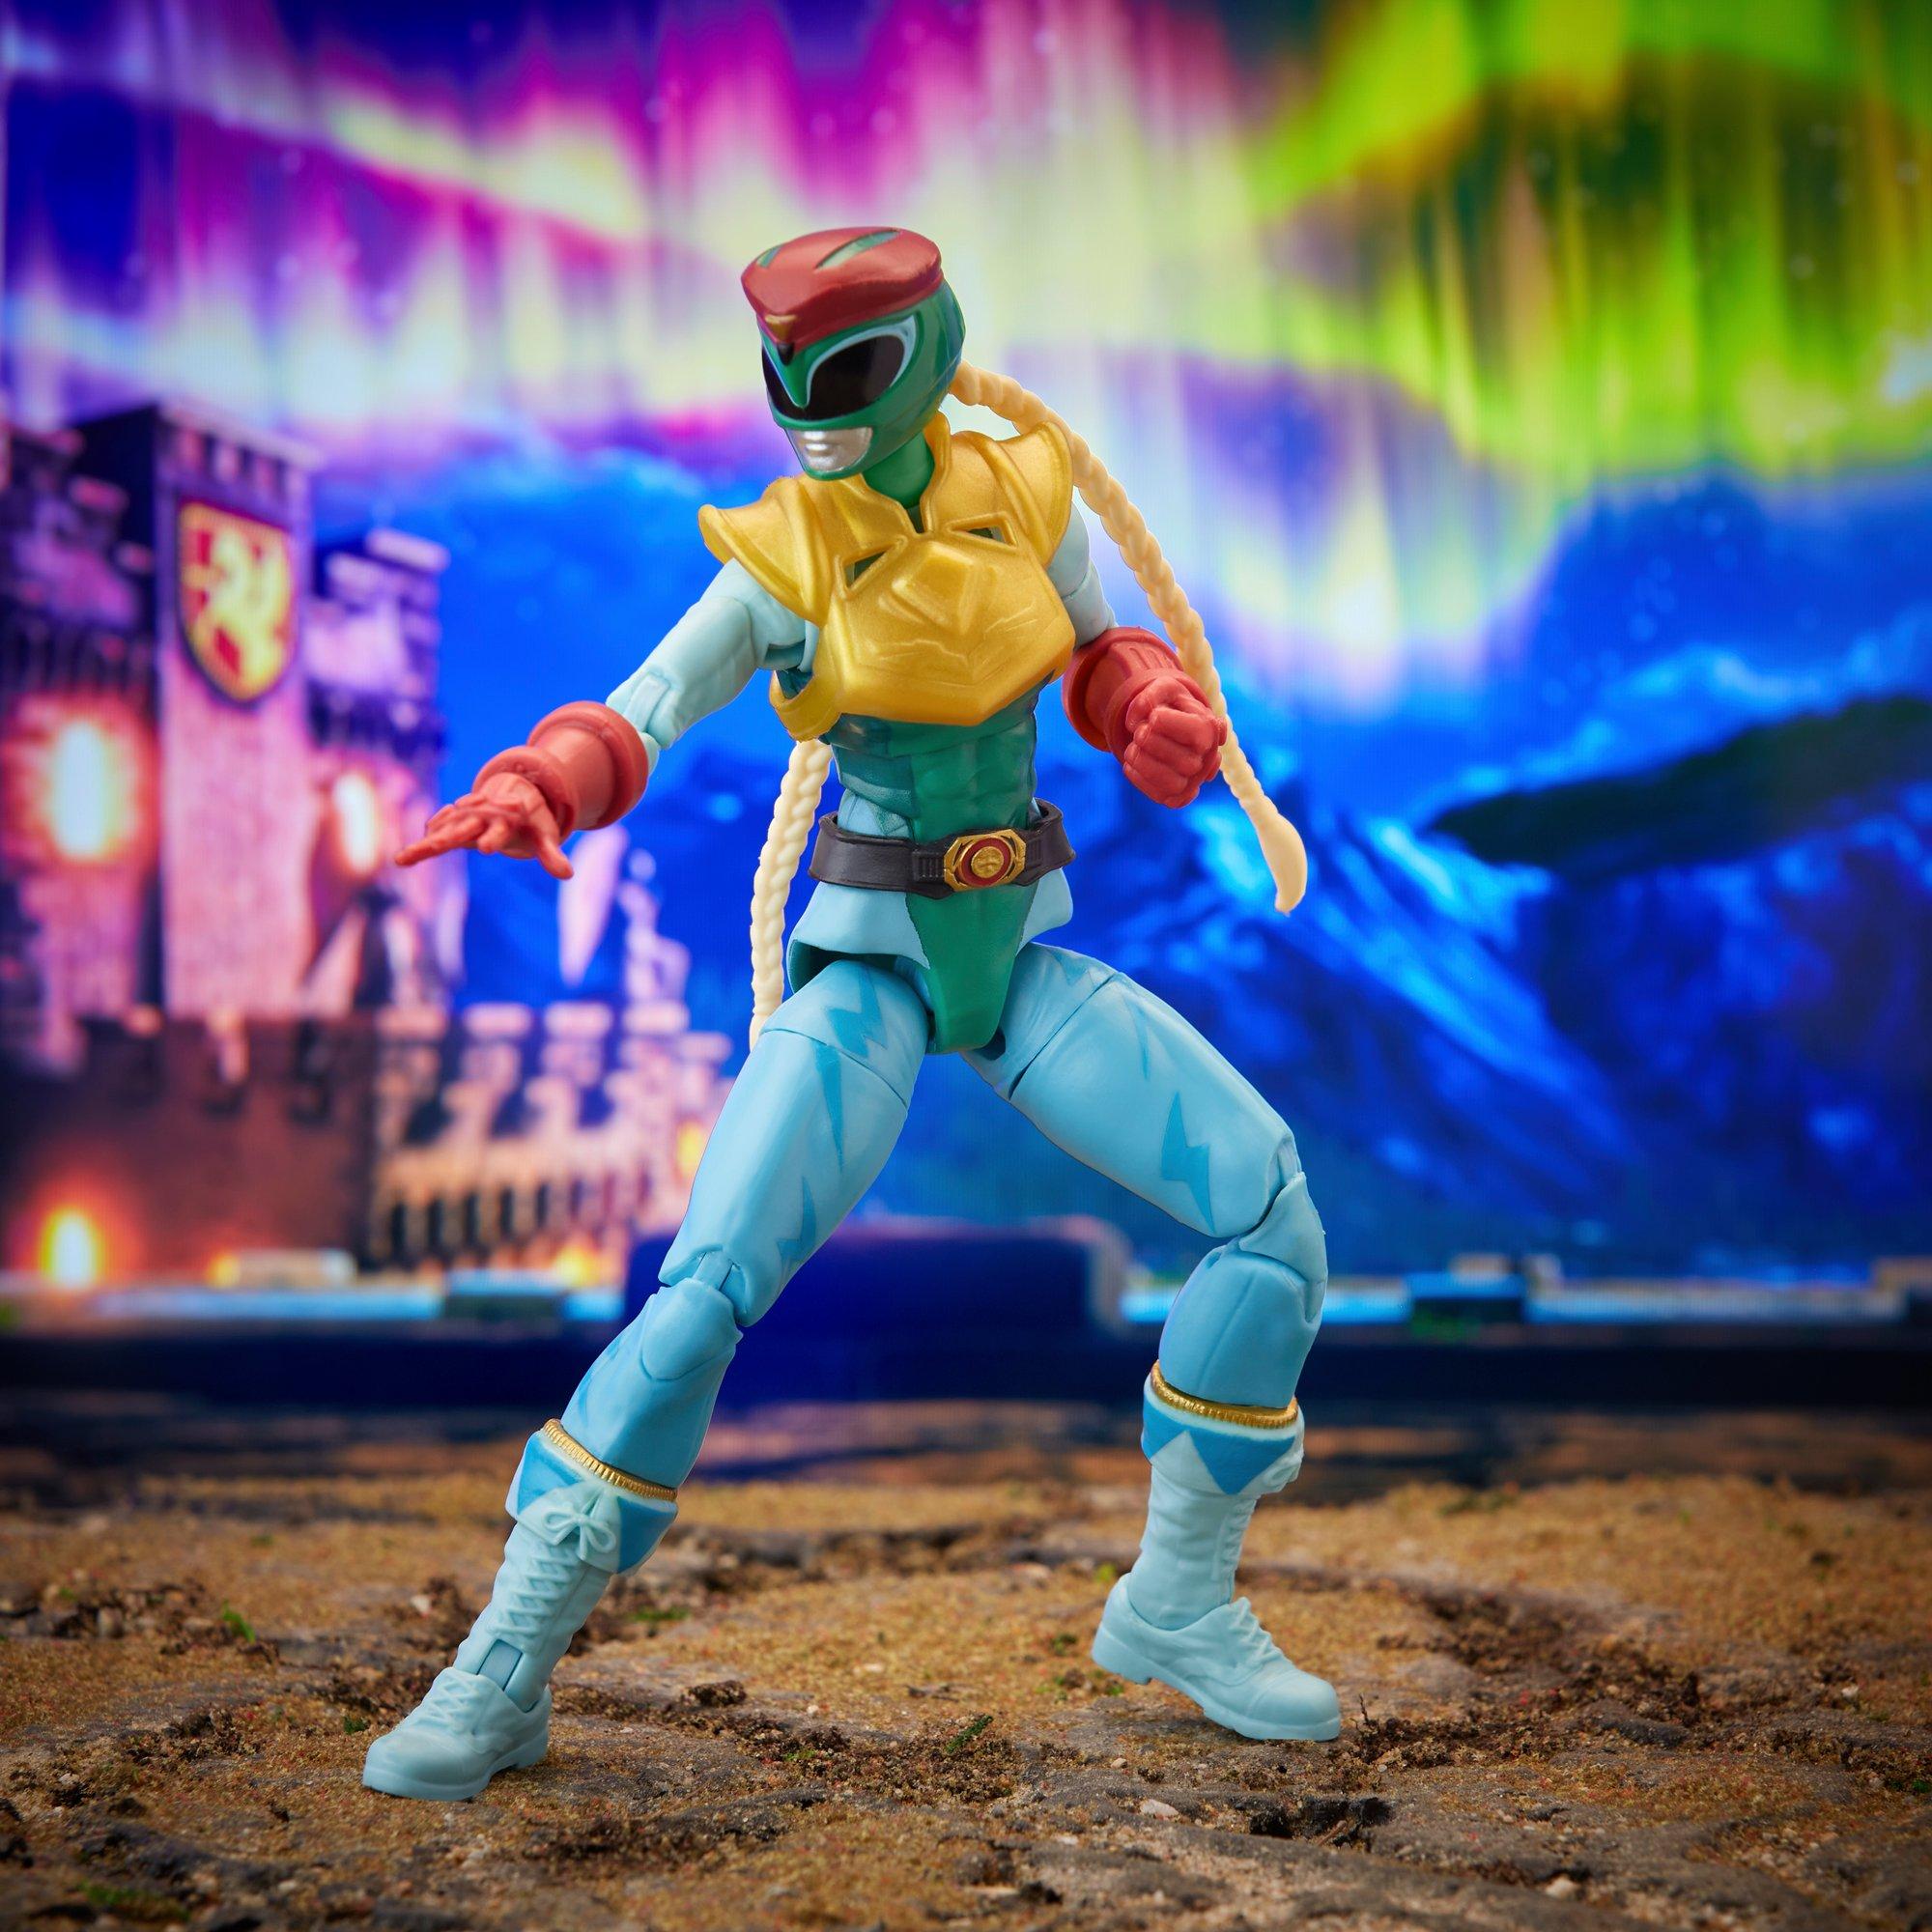 Hasbro Lightning Collection Mighty Morphin Power Rangers x Street Fighter Collab Cammy 6-in Action Figure